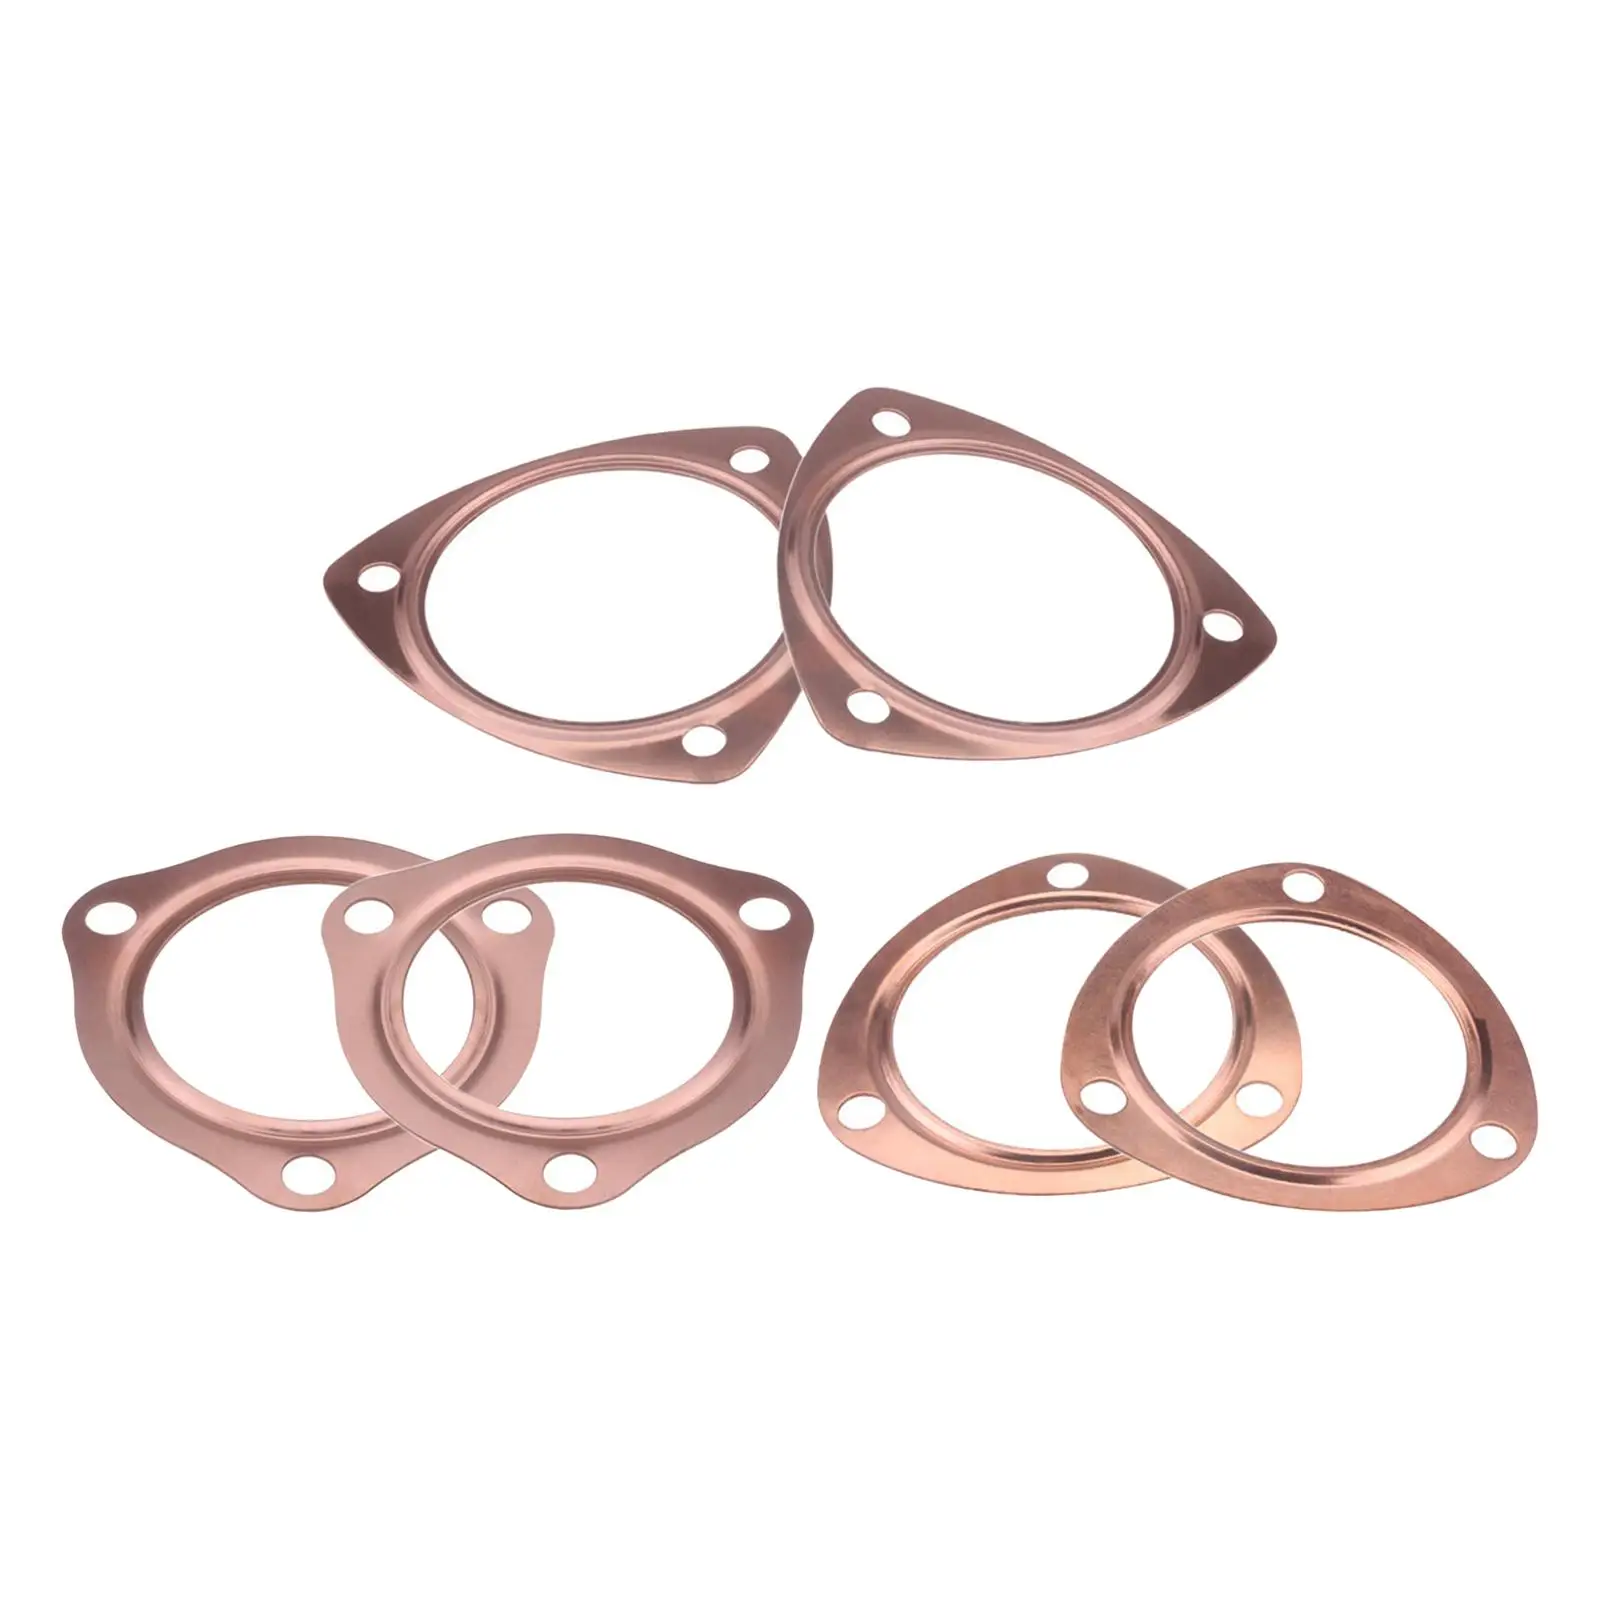 Copper Collector Gasket Reusable Wear Resisting for Sbc Bbc 302 350 454 Replacement